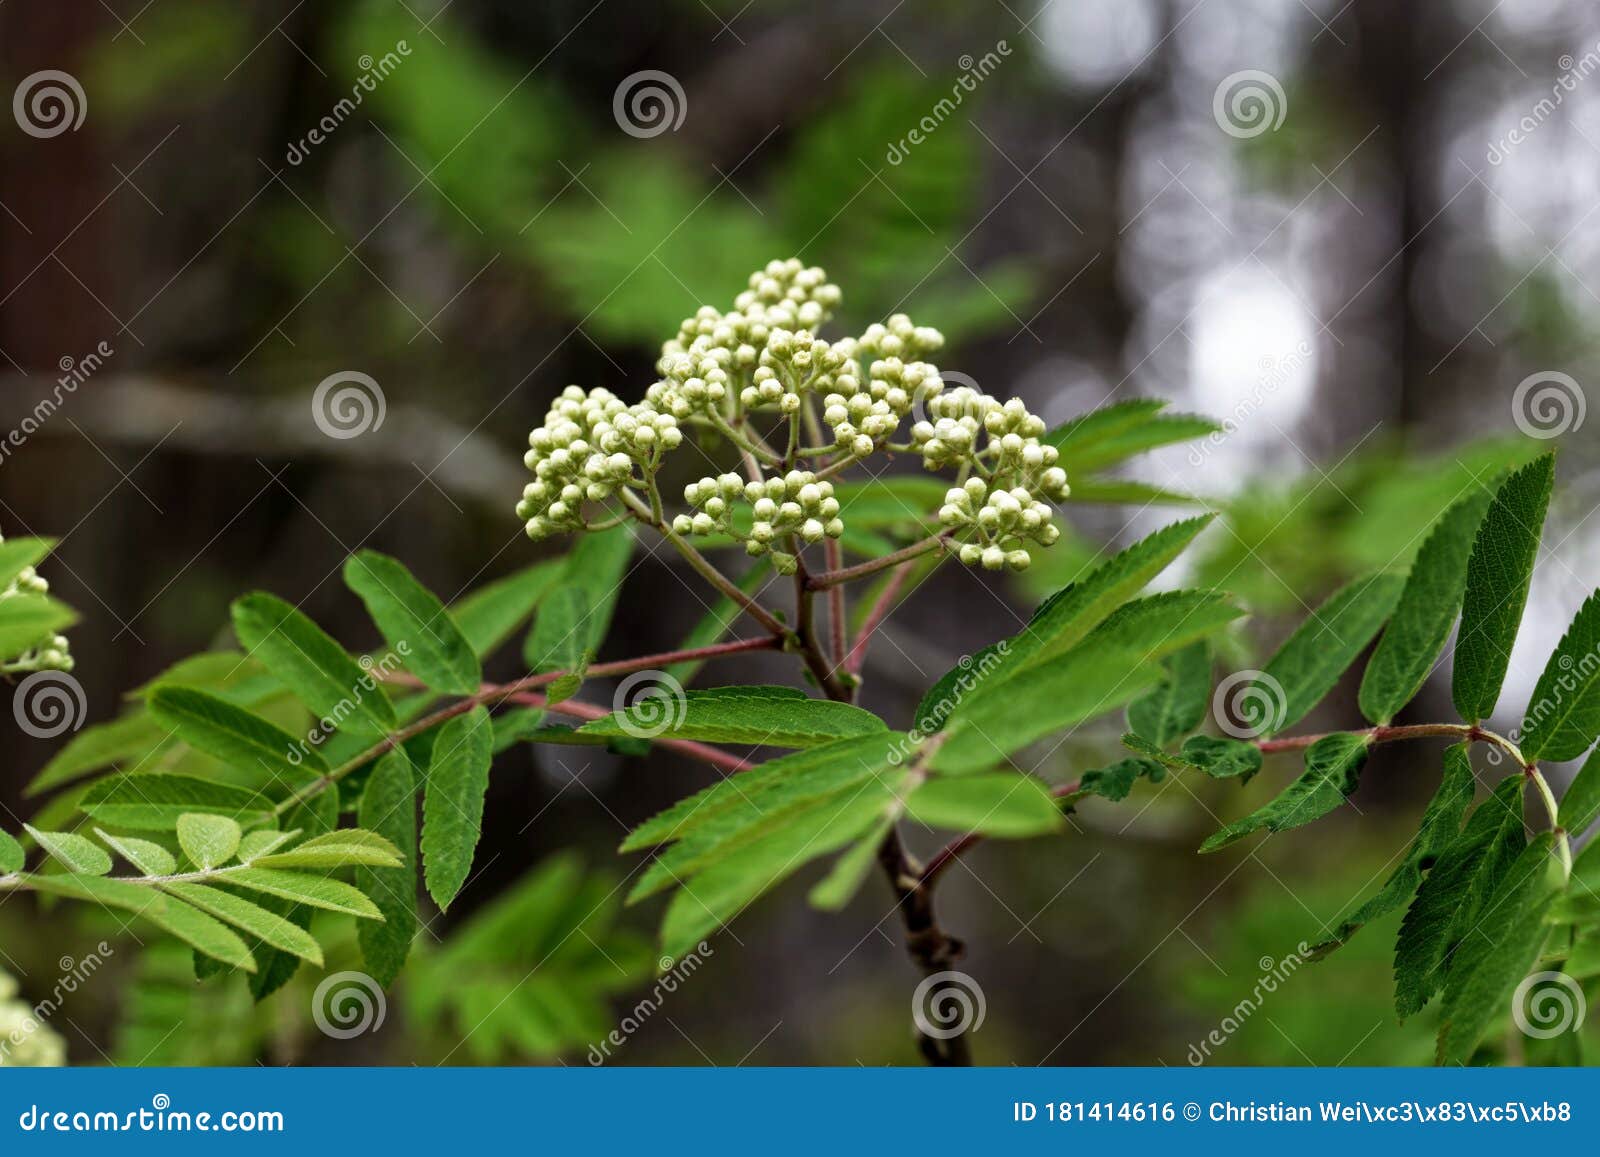 Blossoms Of A Rowan Tree, Sorbus Aucuparia, With Leaves. Sorbus ...